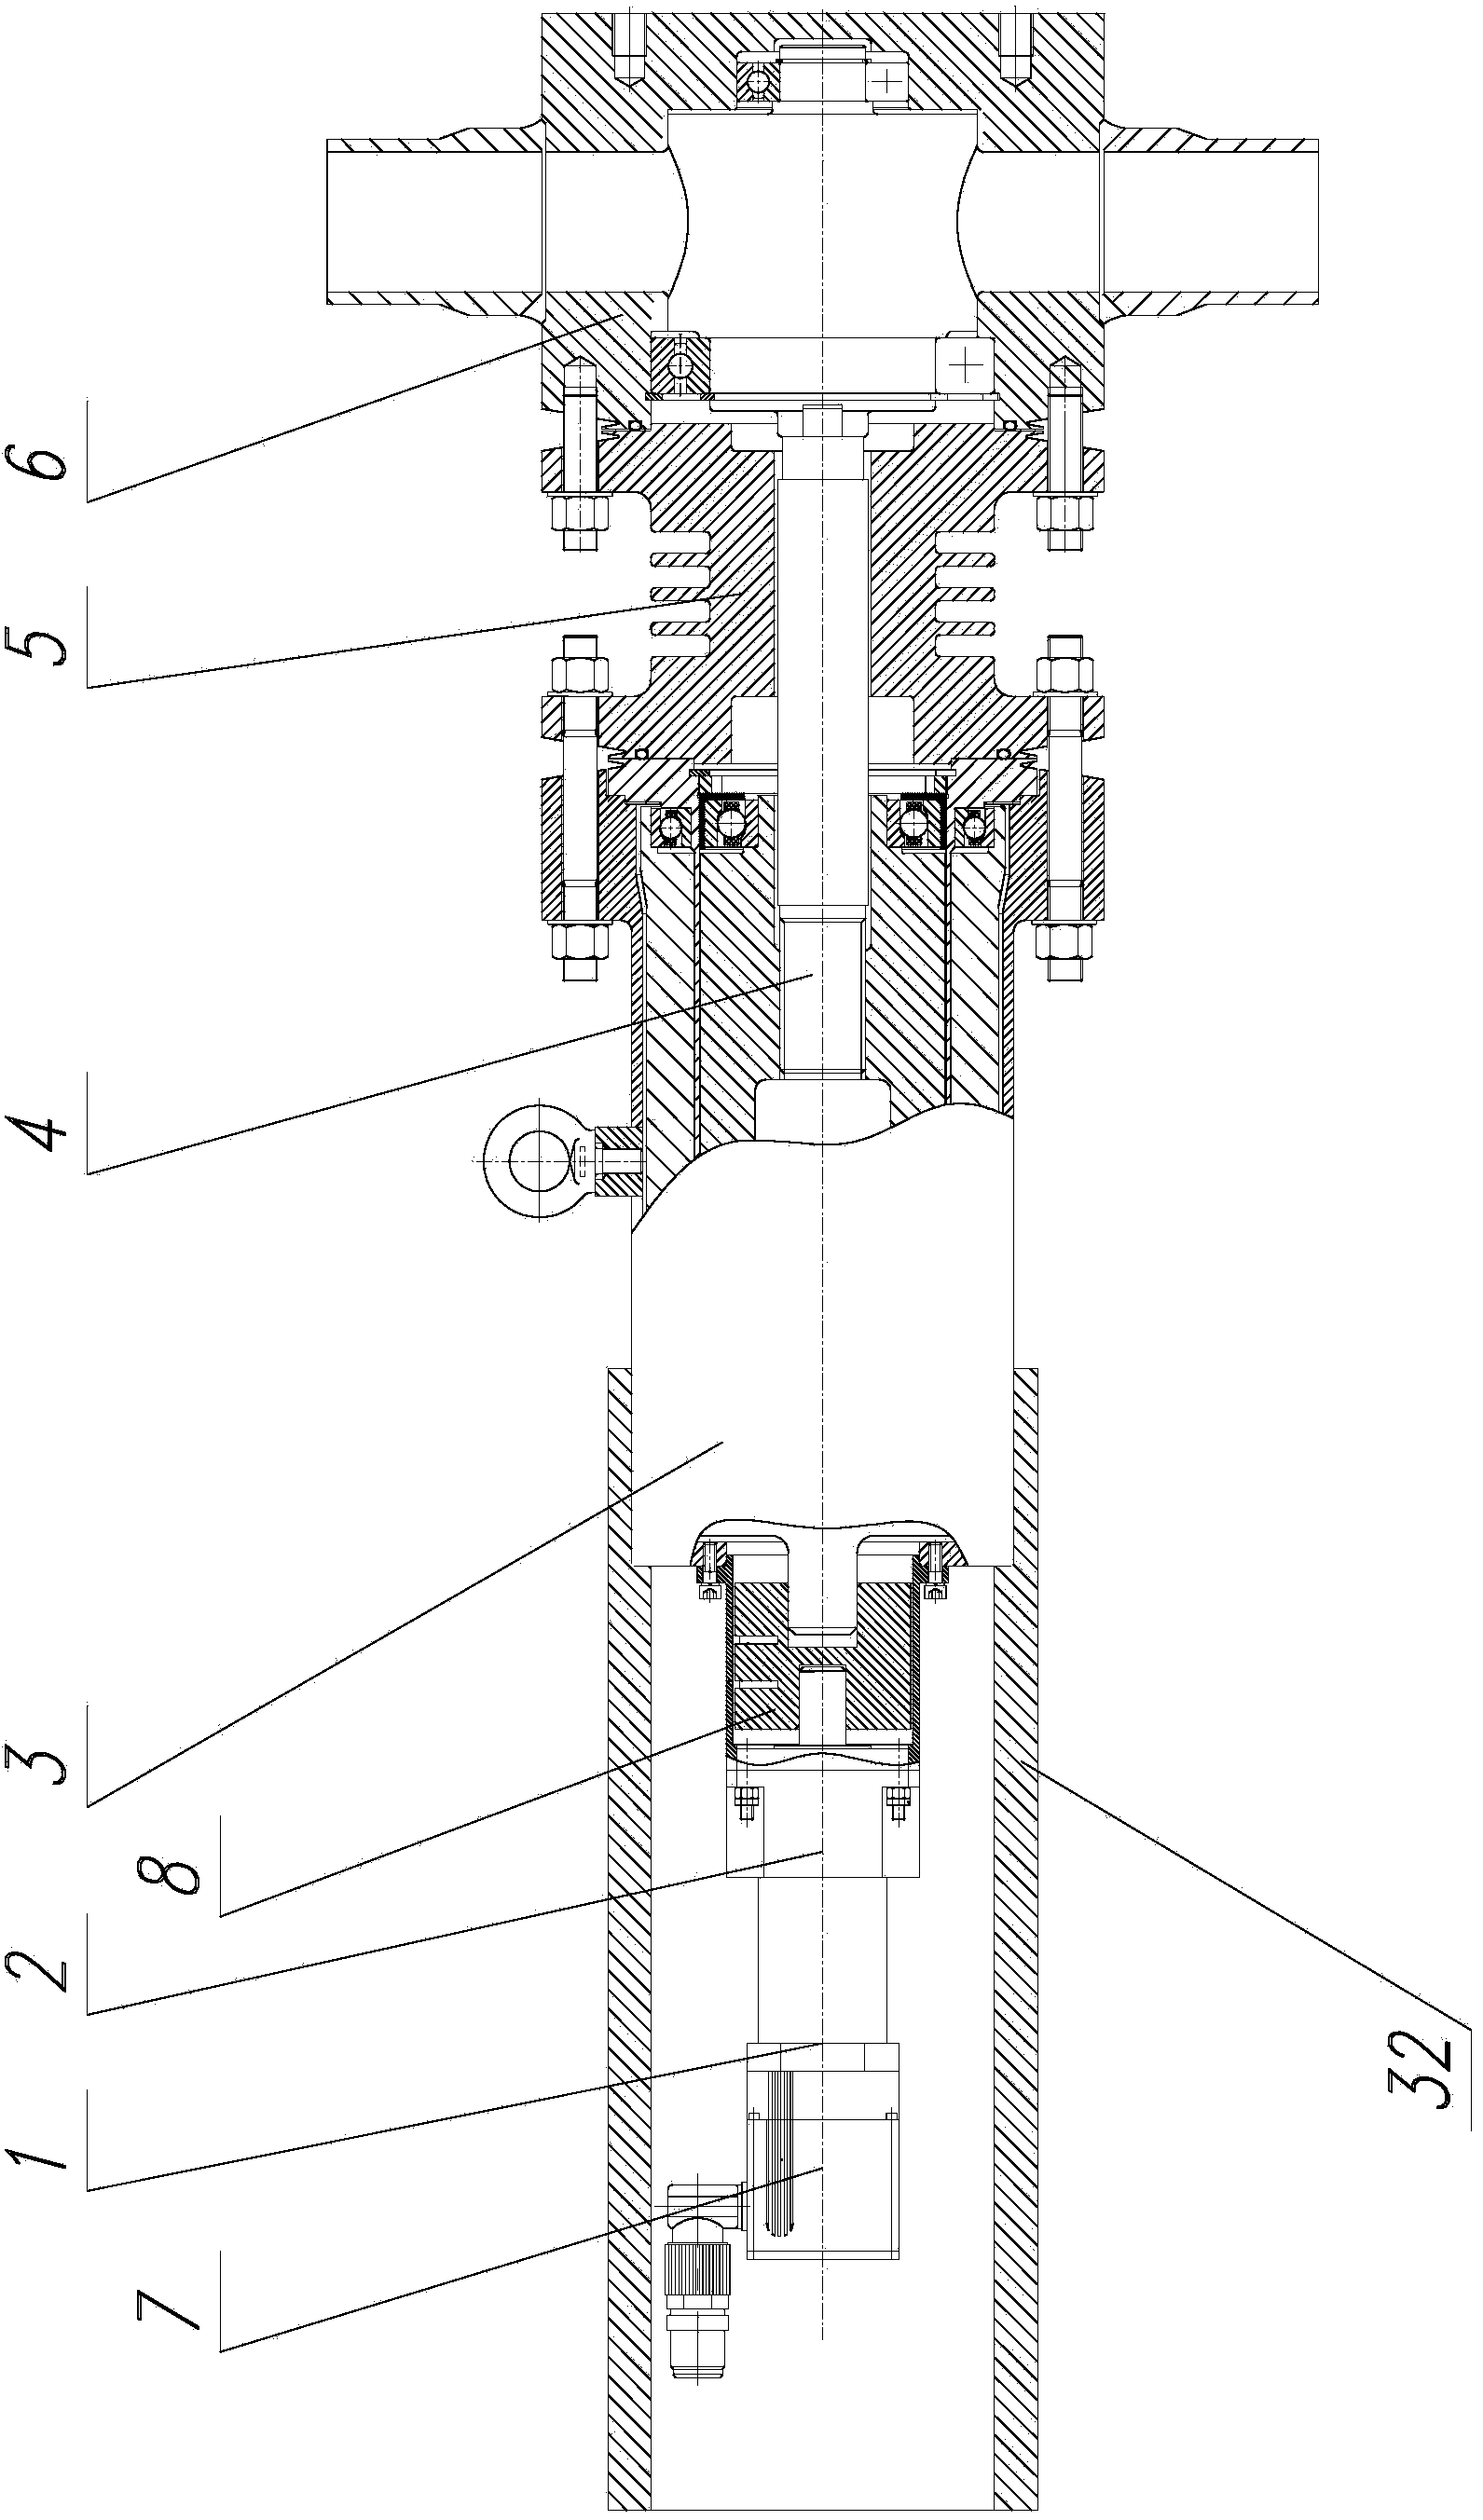 Ball stopper applied to high-temperature gas-cooled reactor